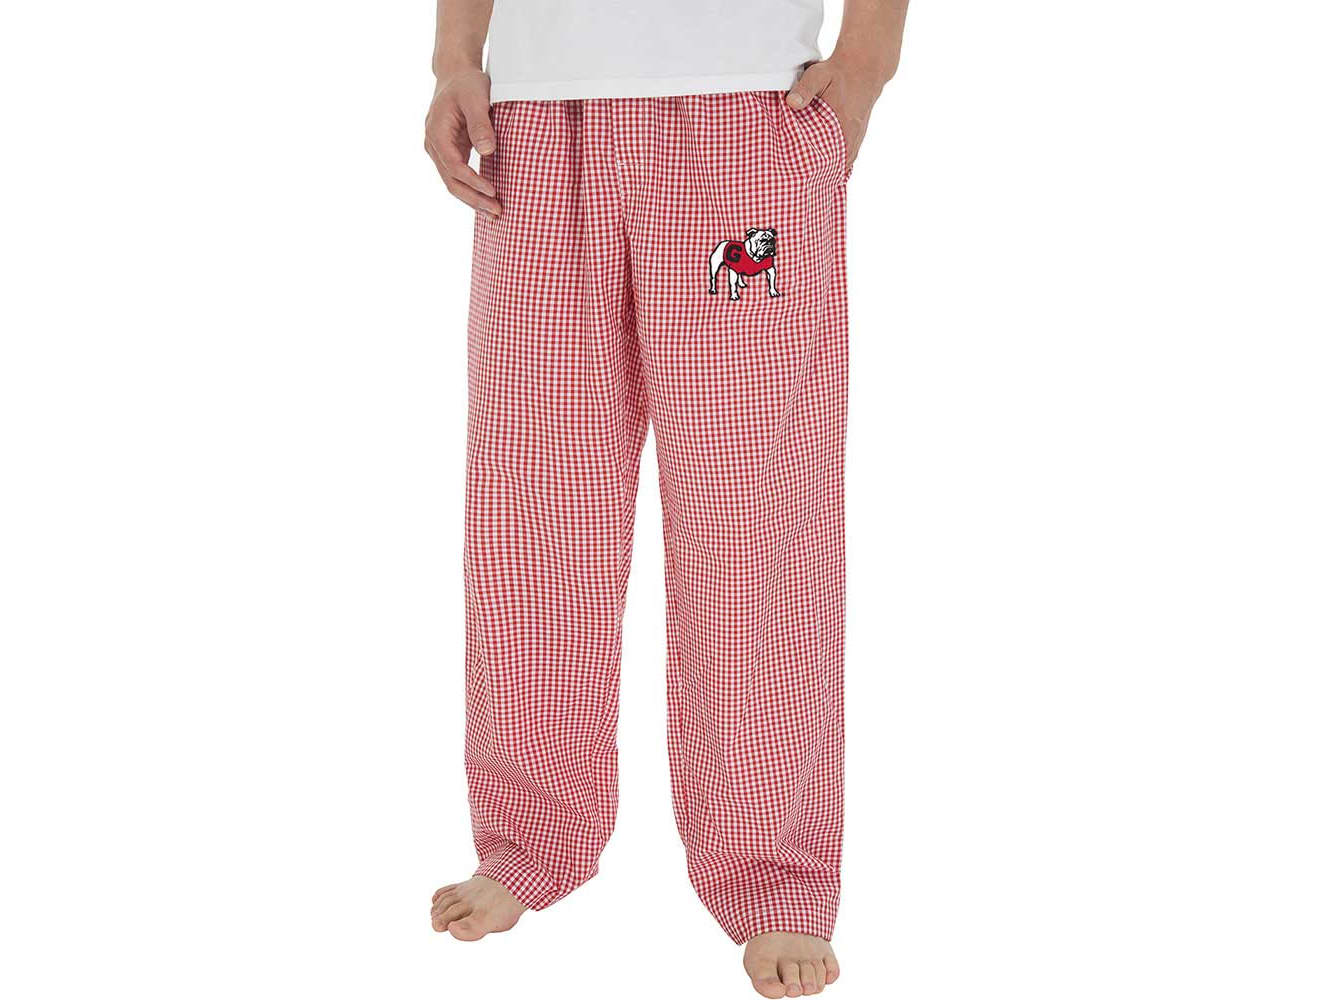 College Concepts Georgia Football UGA Mainstay Womens Embroidered Plaid Flannel  Pajama Pants - Dawg Fans Only